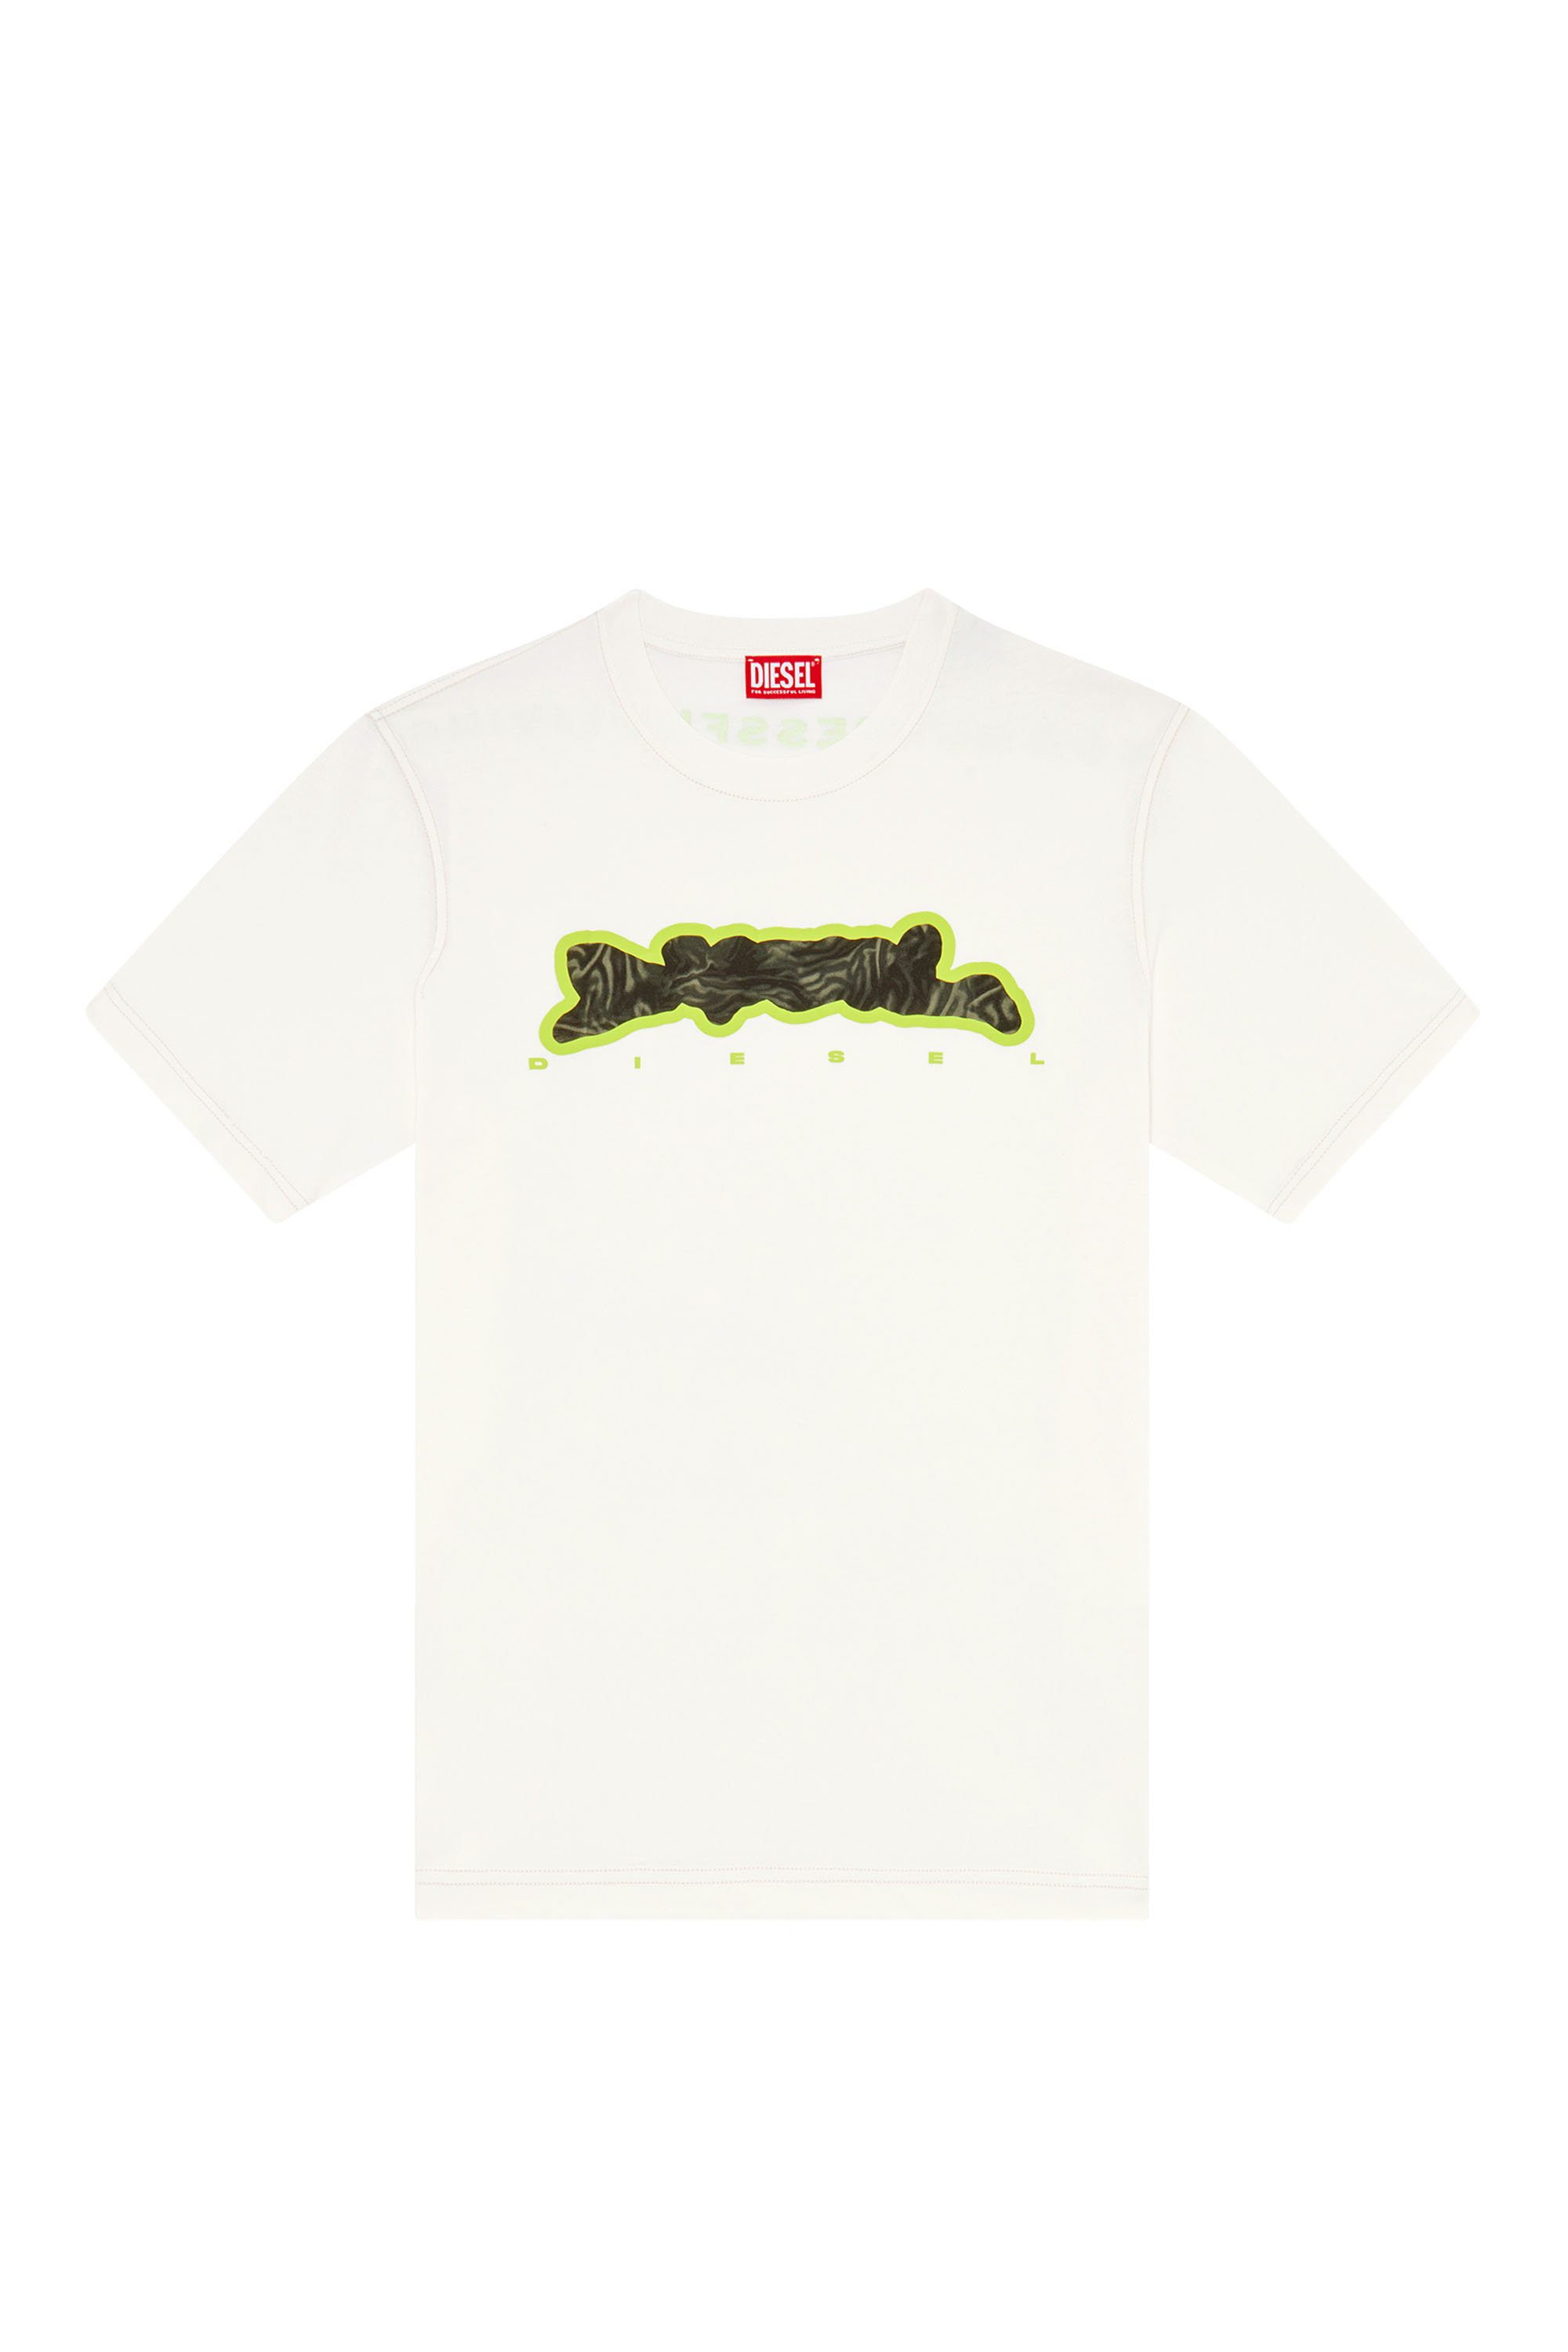 Diesel - T-JUST-N16, Man T-shirt with zebra-camo motif in White - Image 3